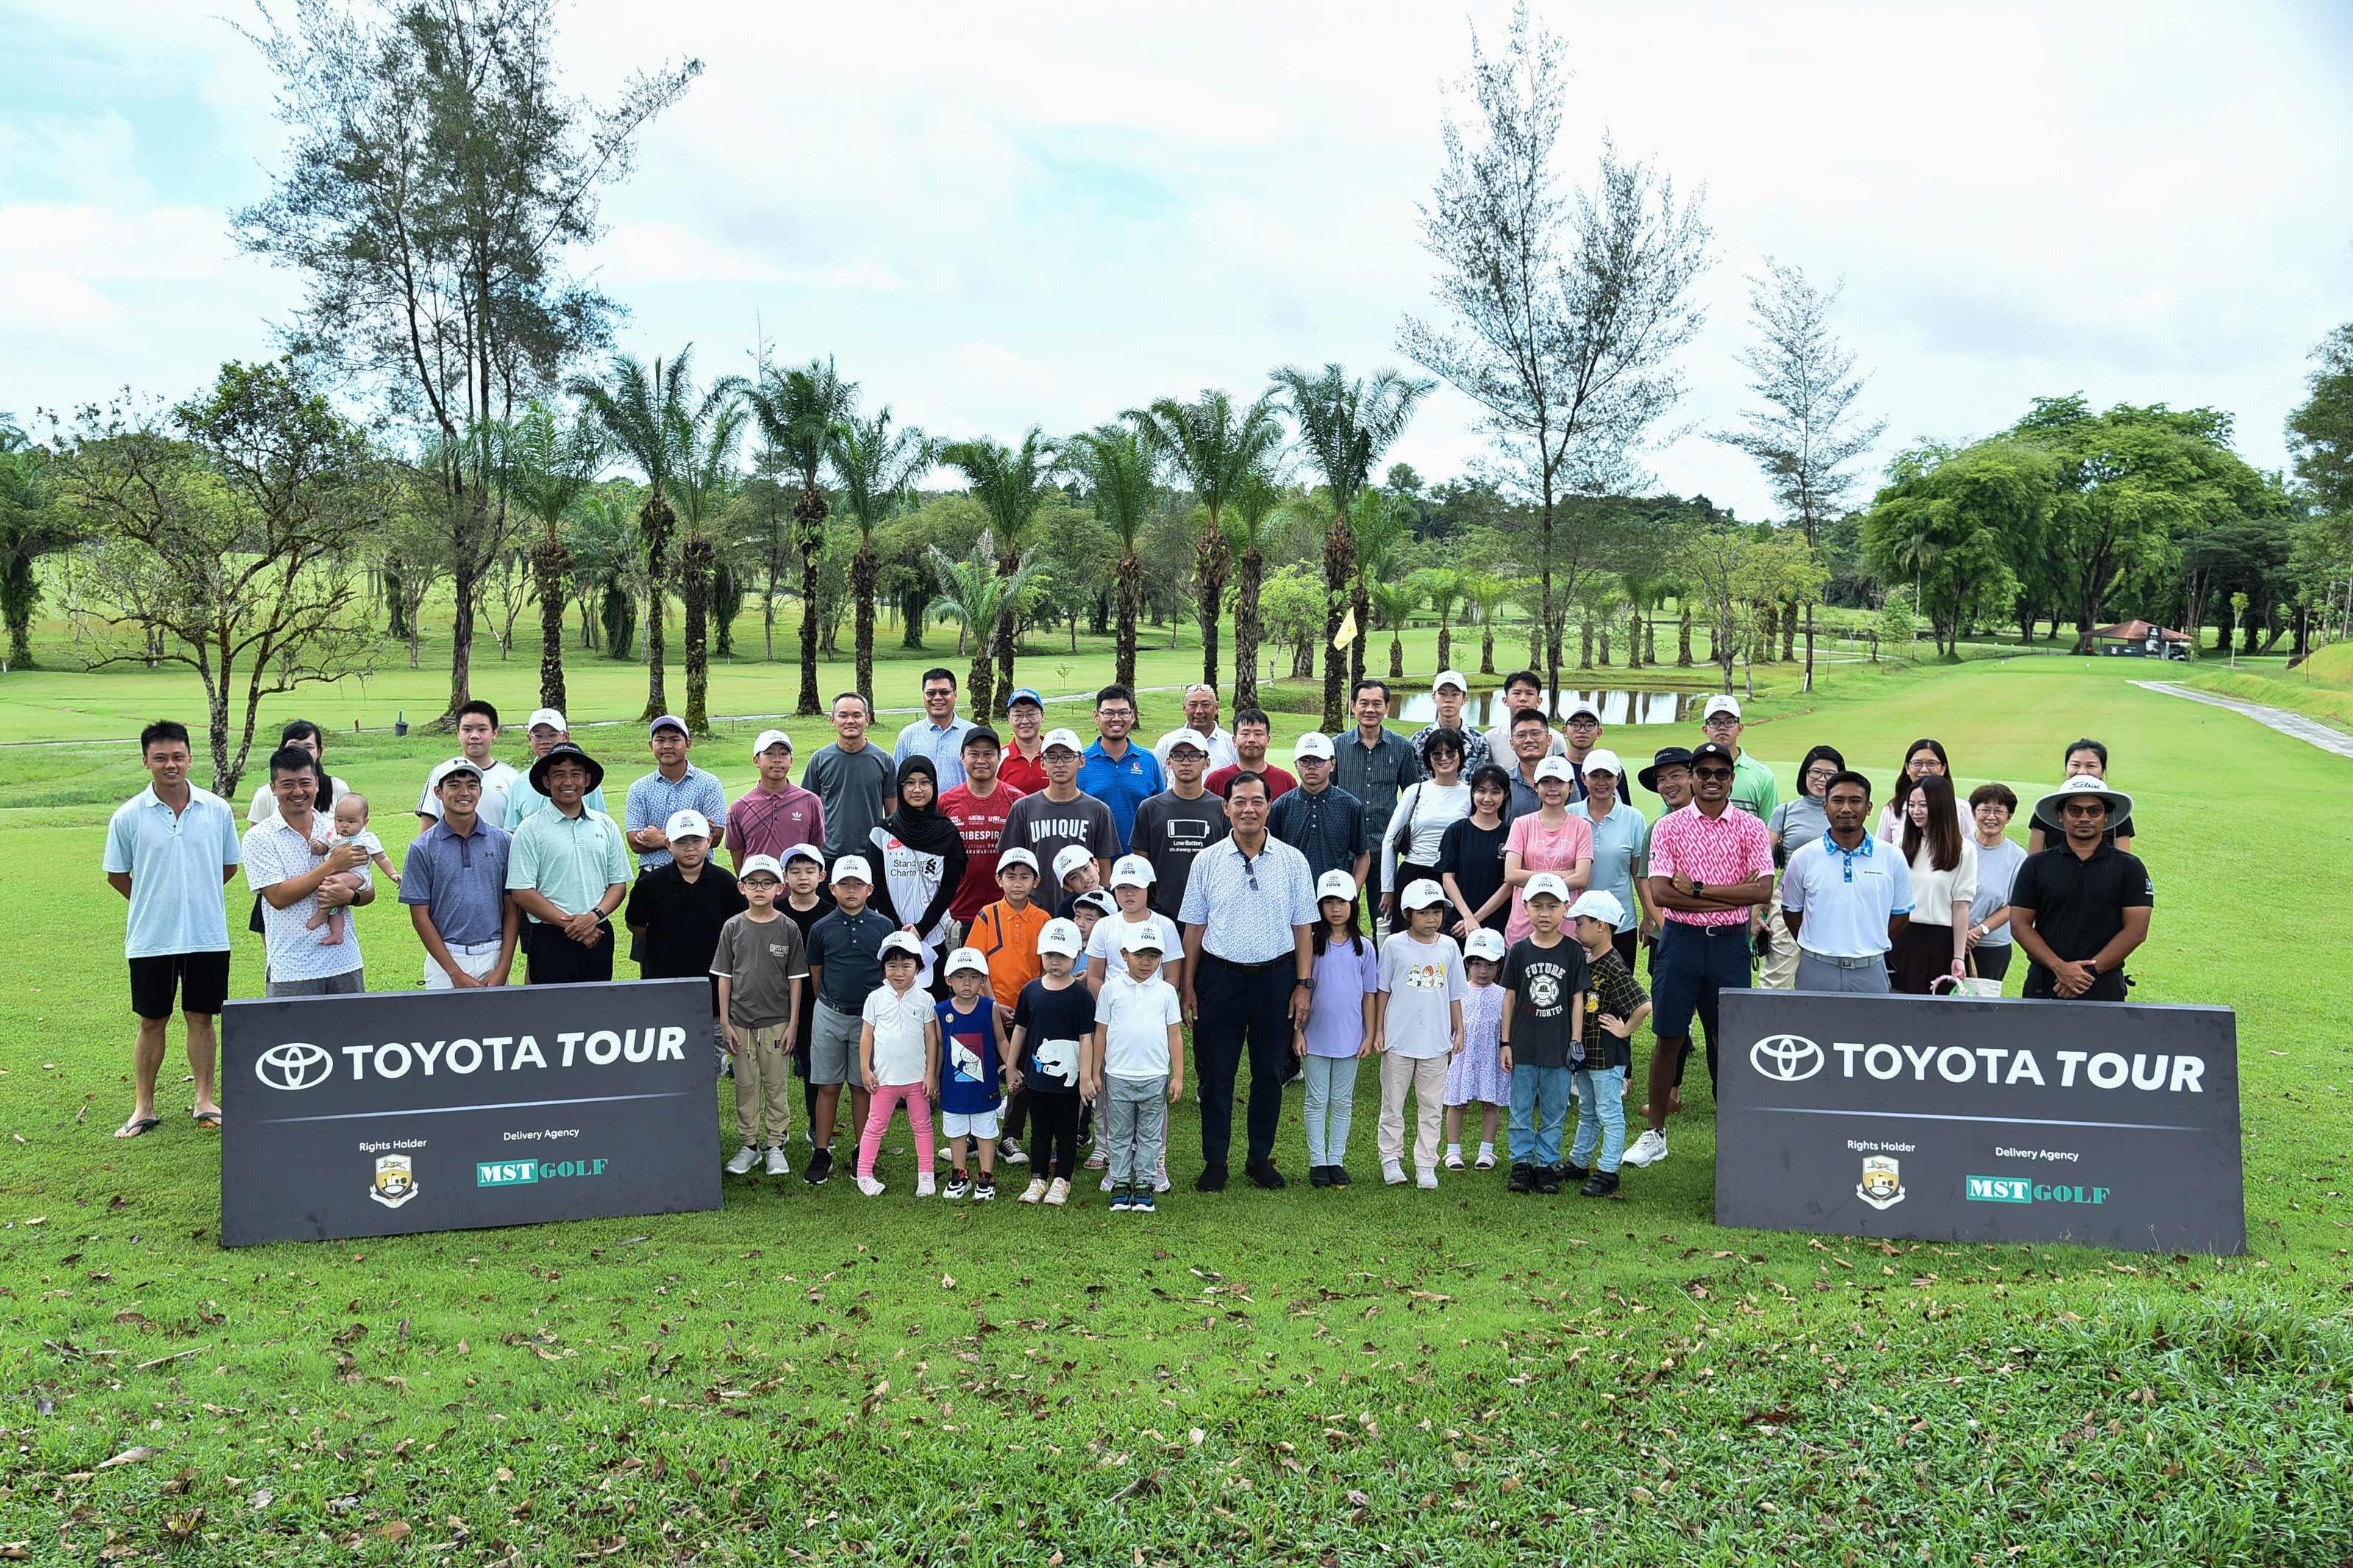 30 SIBU JUNIORS GET VALUABLE TIPS FROM TOYOTA TOUR PROFESSIONALS – Toyota